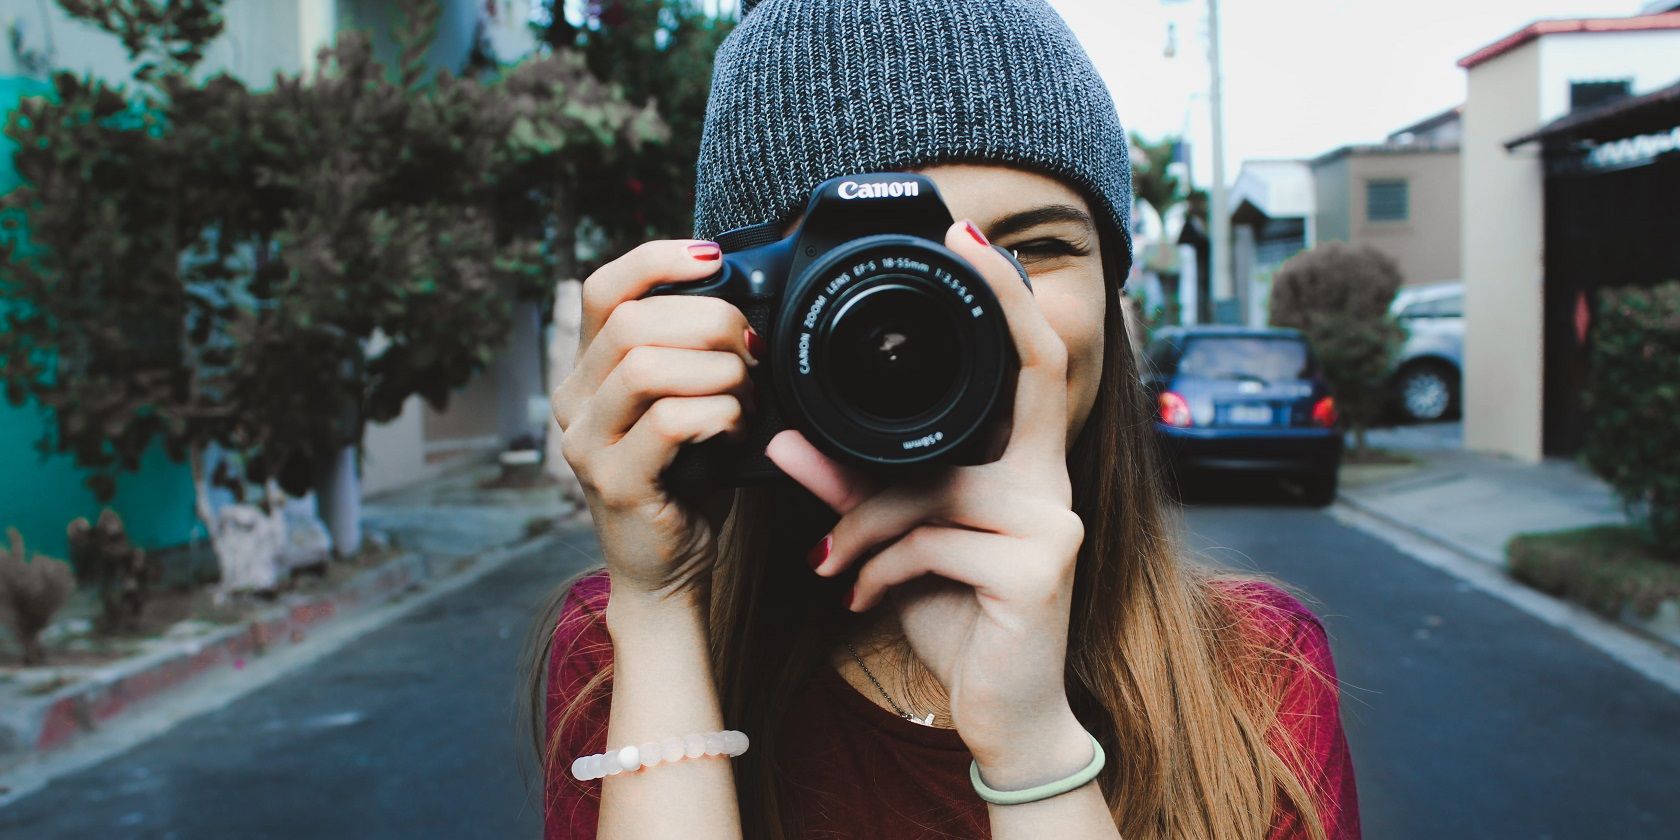 Woman Holding Camera in Street